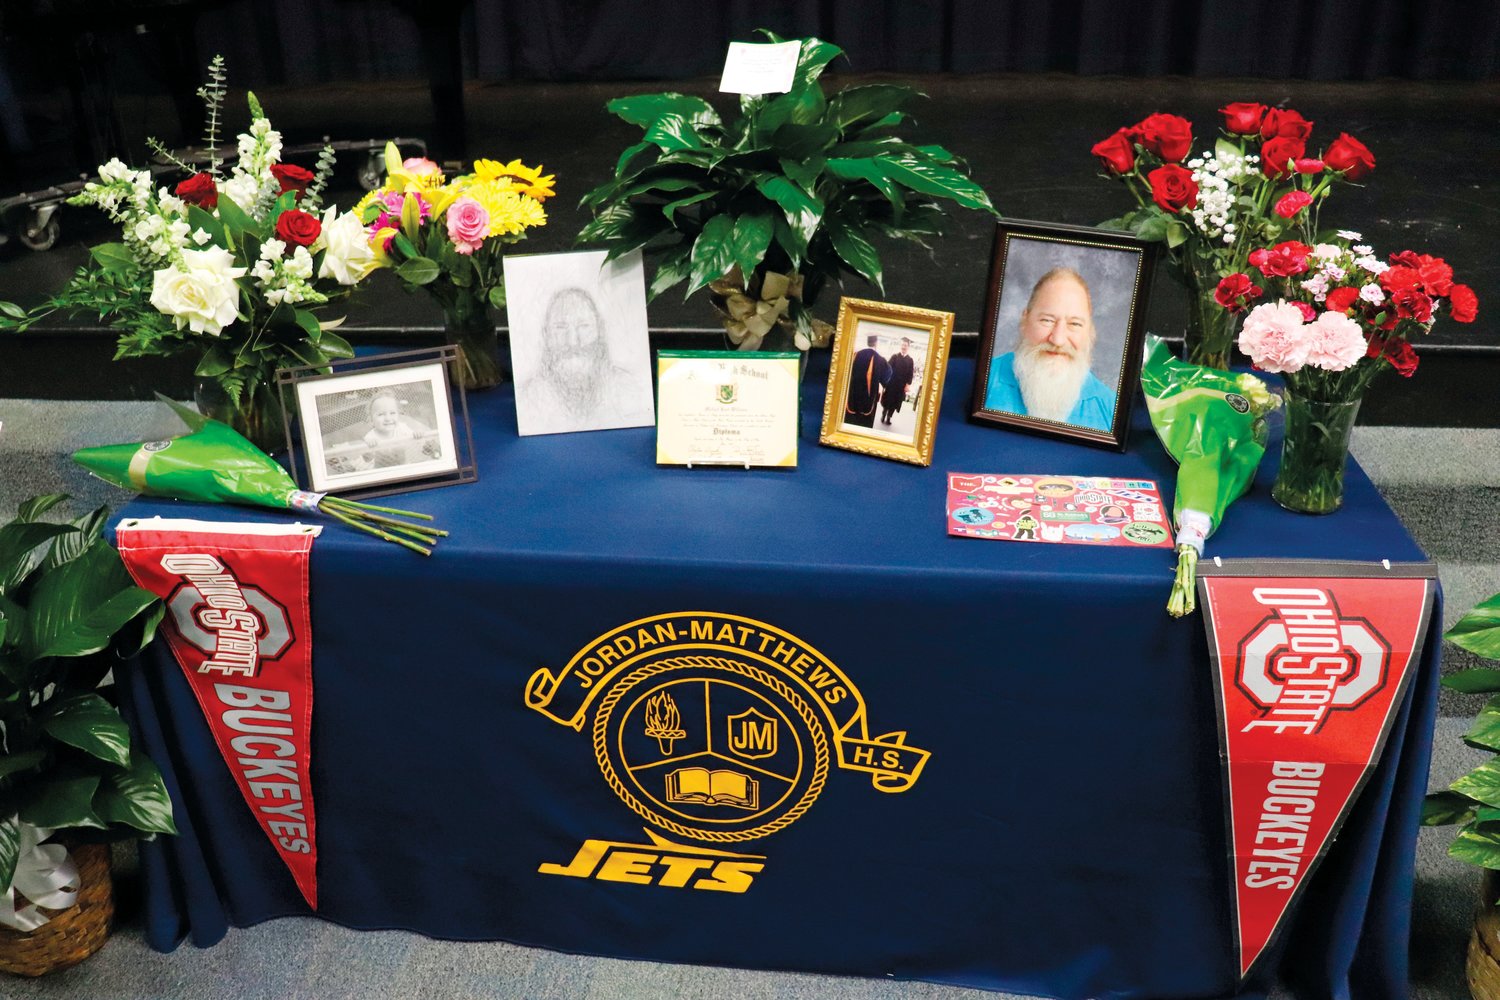 On Nov. 24, beloved Jordan-Matthews teacher Mike Williams died in a car accident. Last Friday, students, staff and community members honored his memory at a celebration of life service.